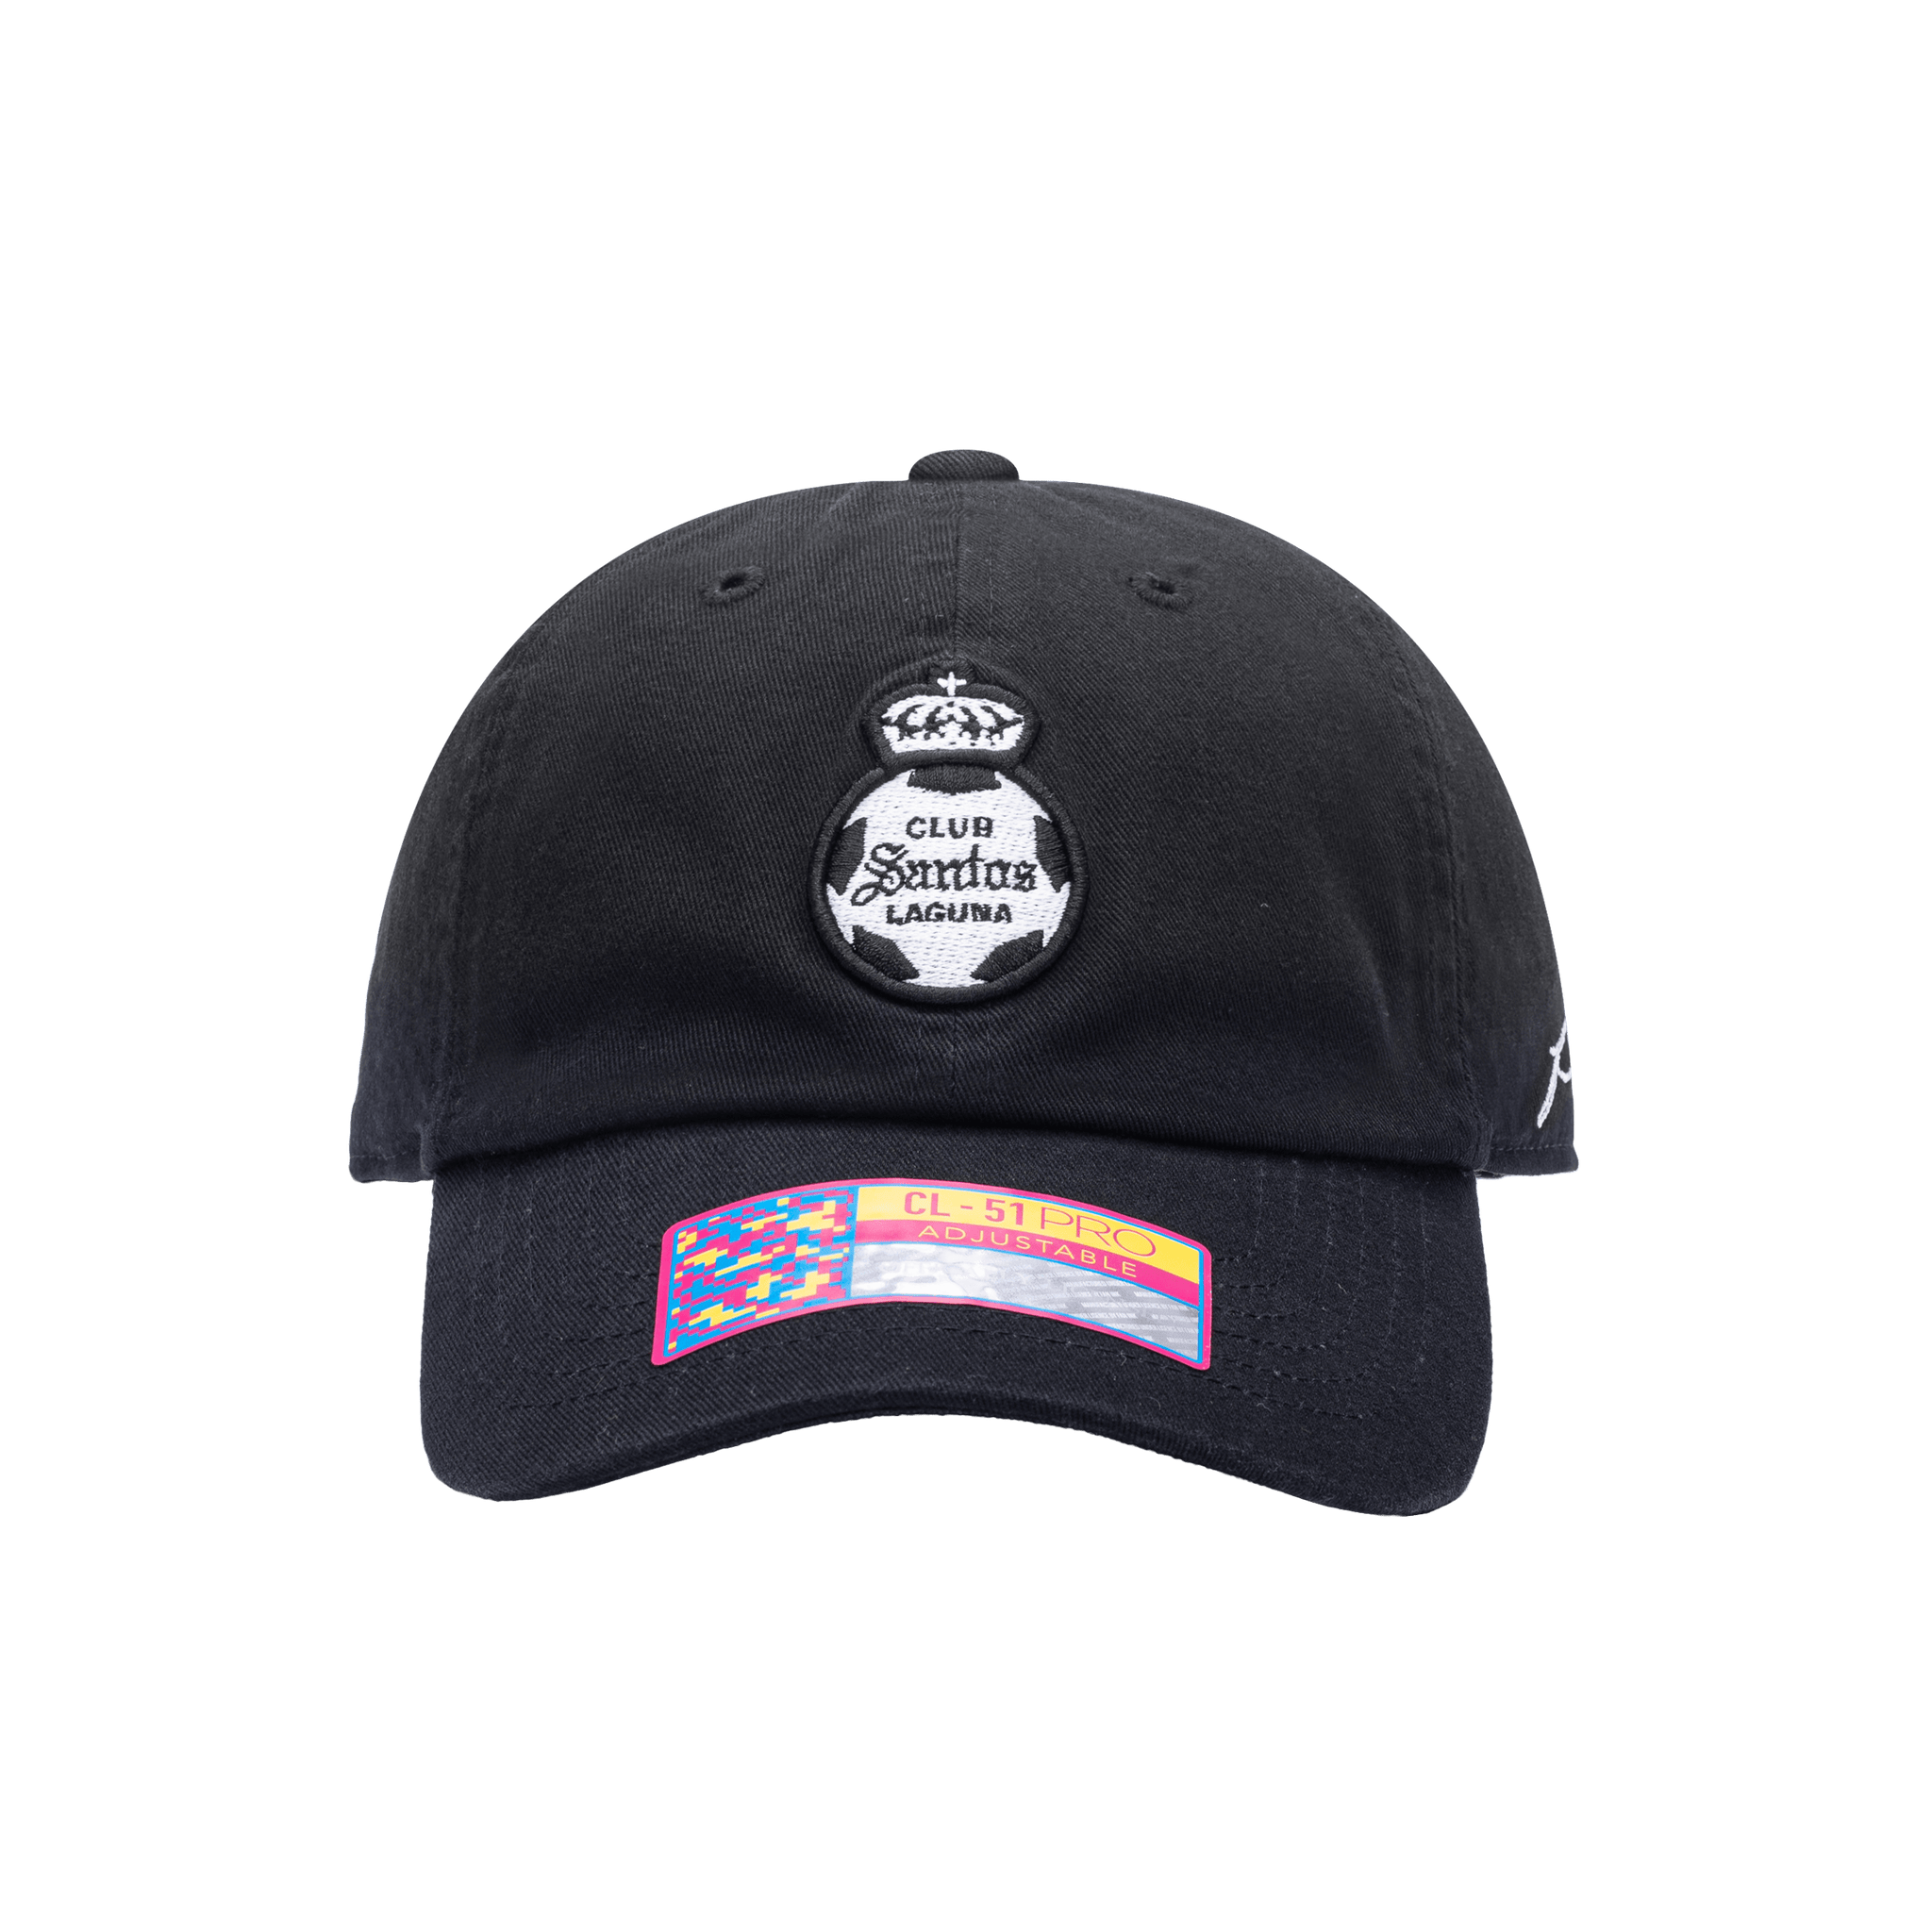 Front view of the Santos Laguna Hit Classic hat with low unstructured crown, curved peak brim, and buckle closure, in black.